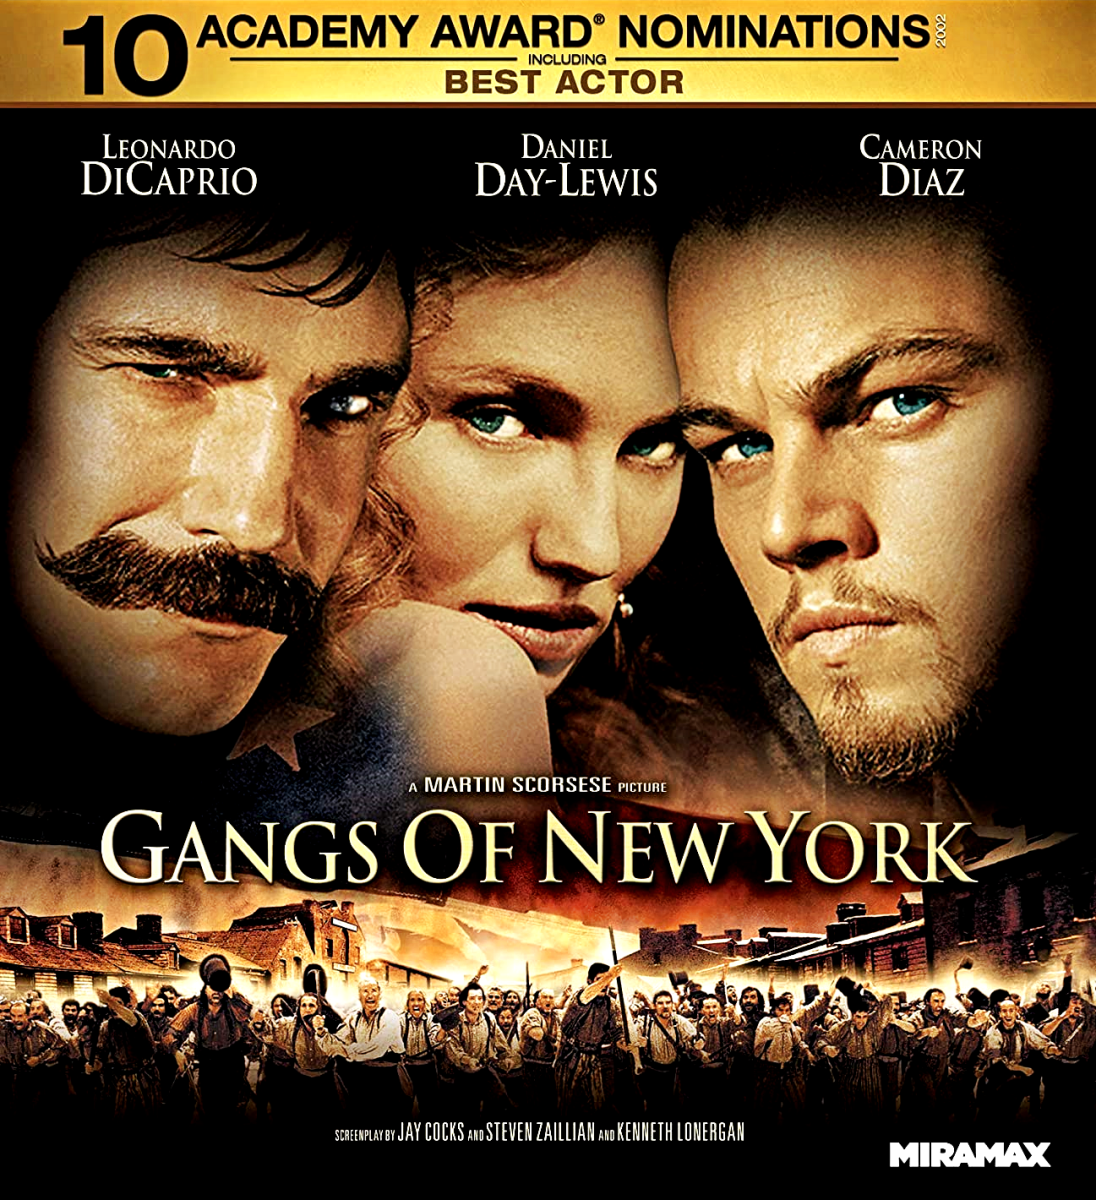 The Real History Behind The Gangs of New York